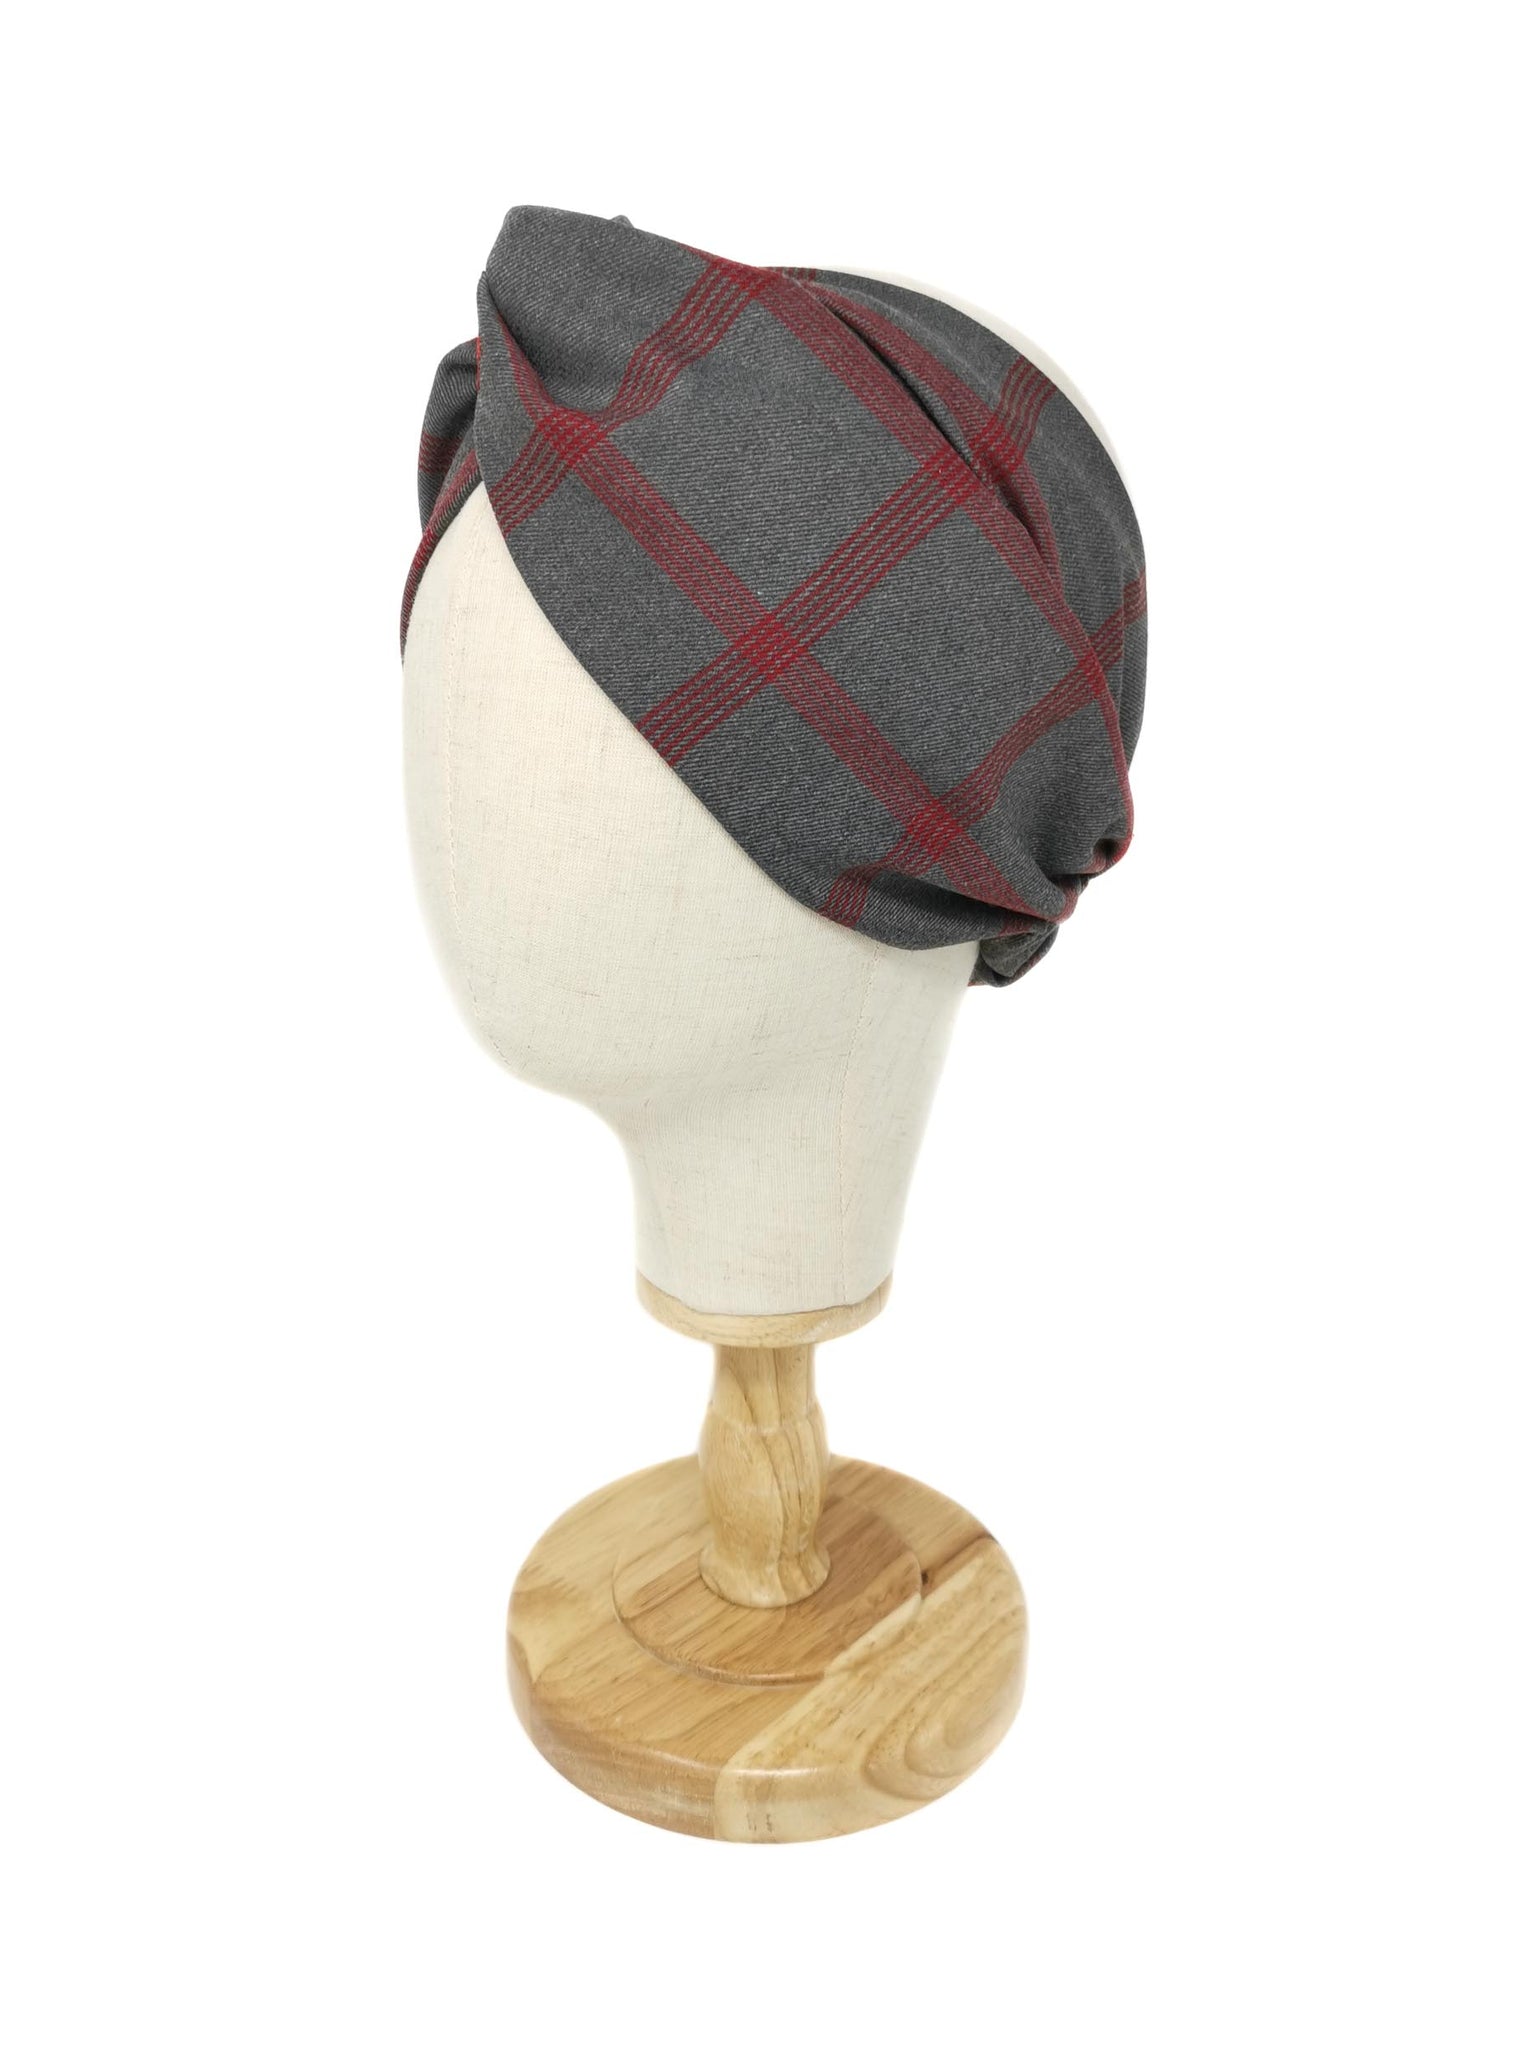 Grey and red tartan patterned wool headband with cotton flowers